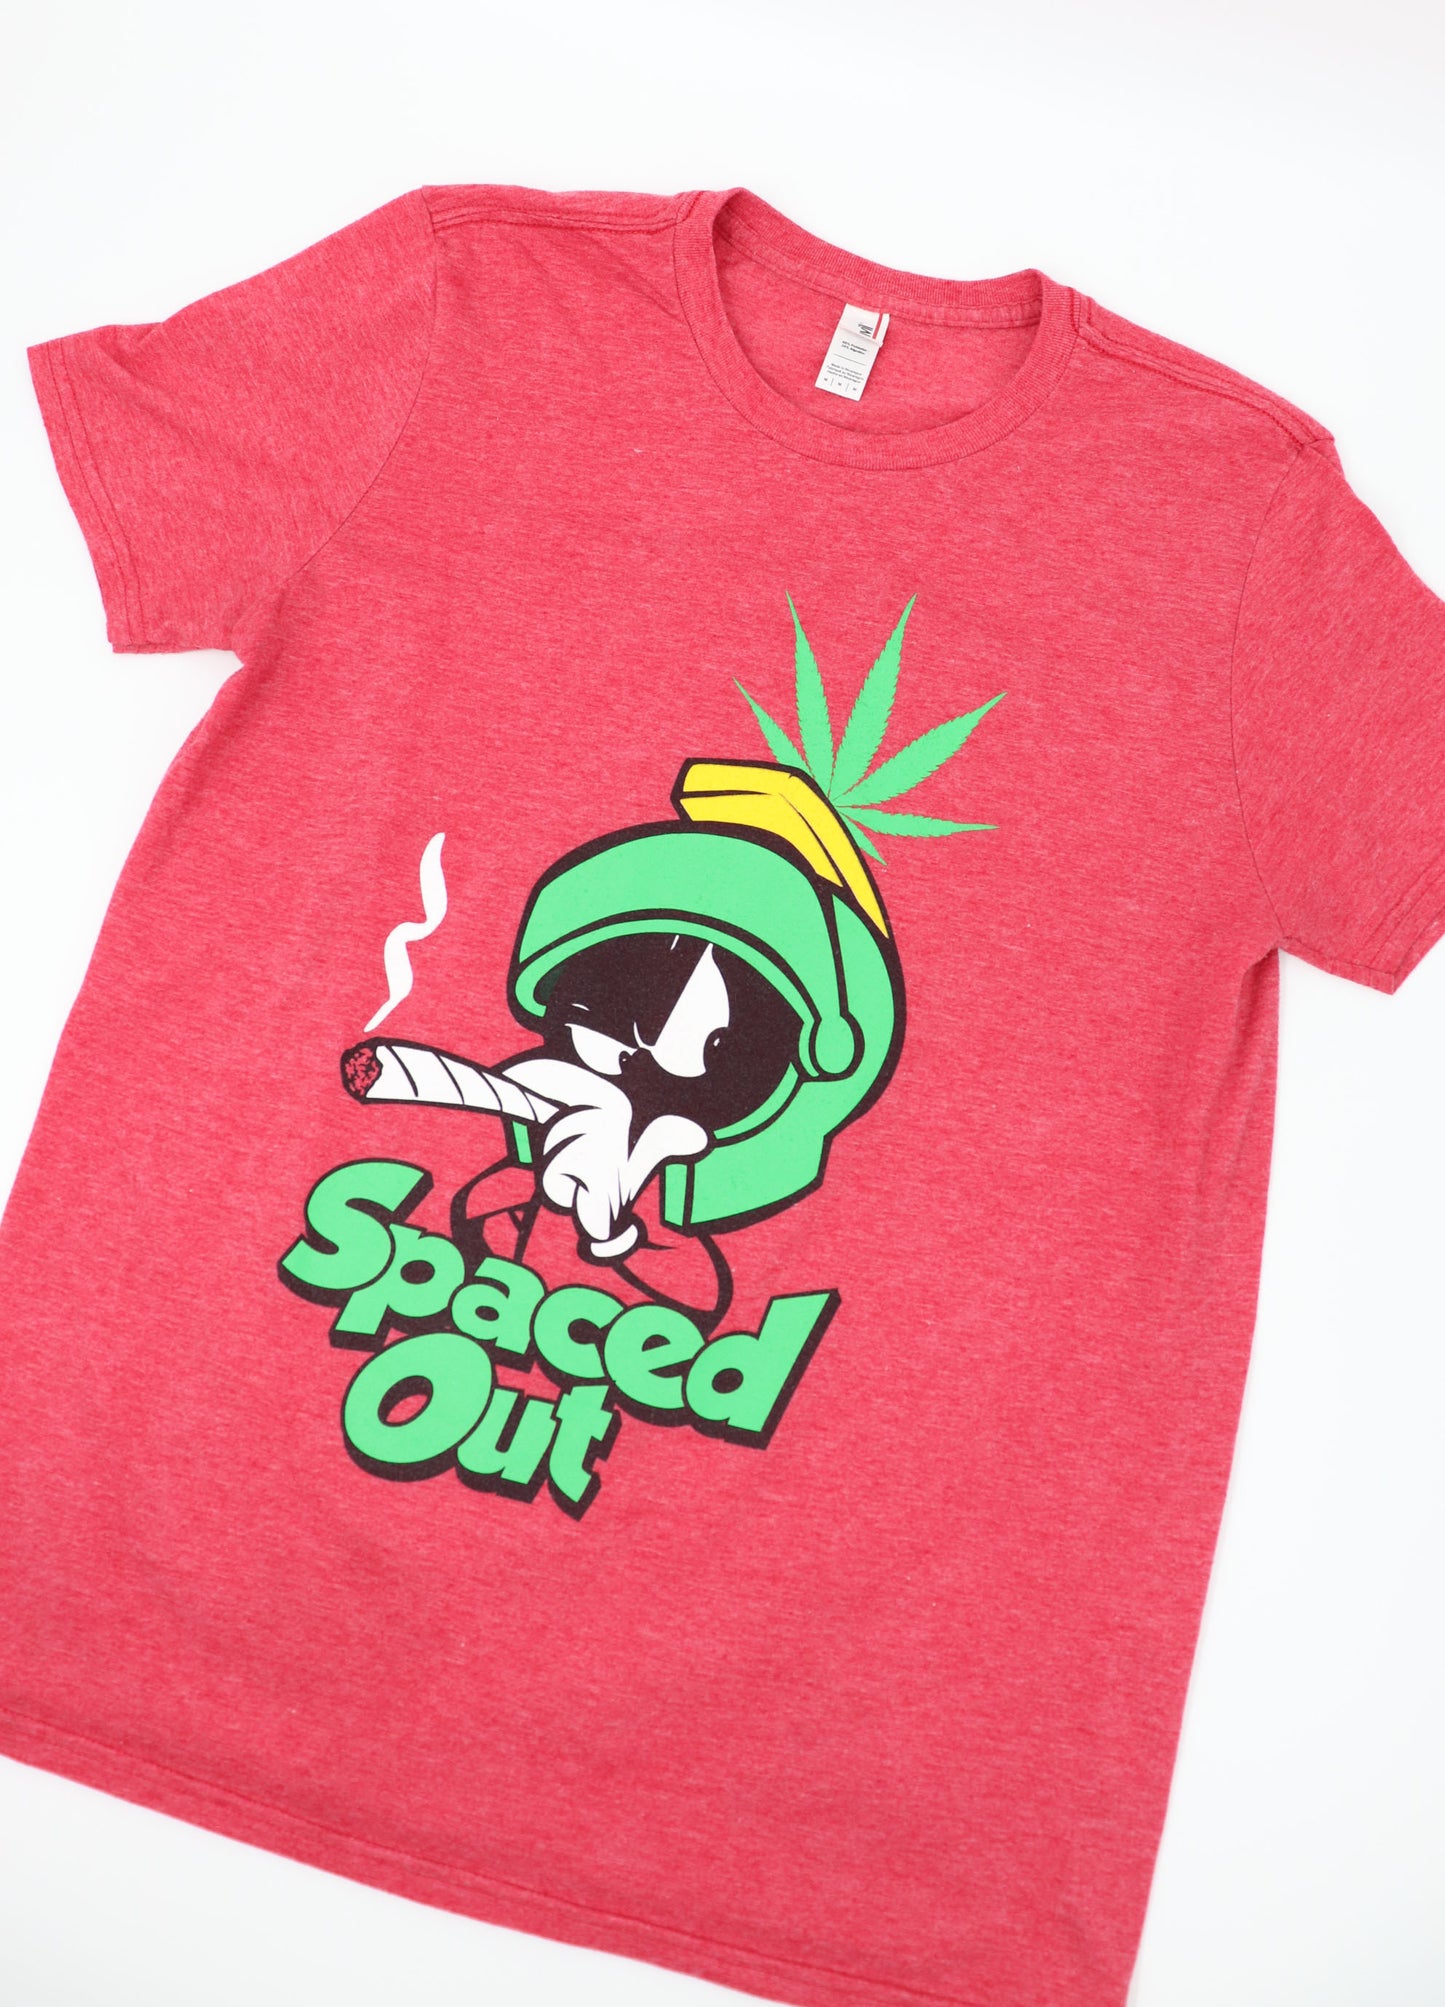 MARVIN THE MARTIAN SPACED OUT